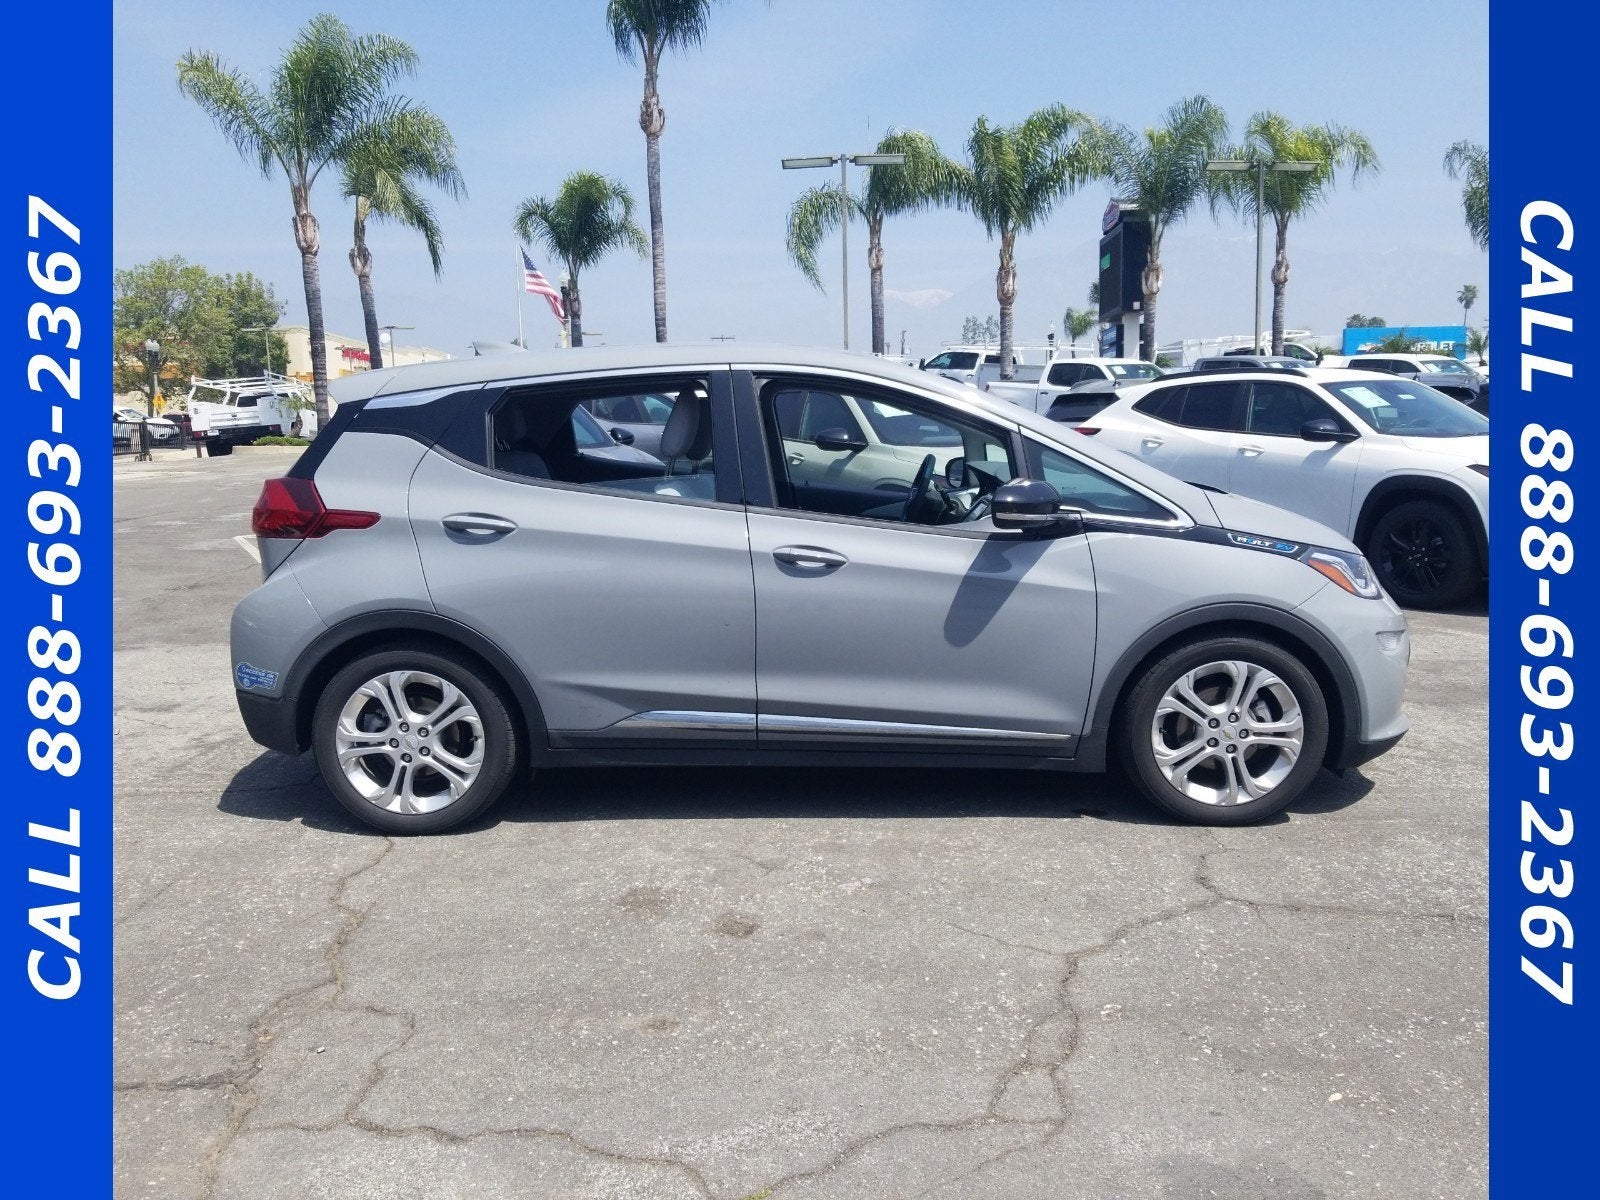 Used 2020 Chevrolet Bolt EV LT with VIN 1G1FY6S07L4145030 for sale in Upland, CA